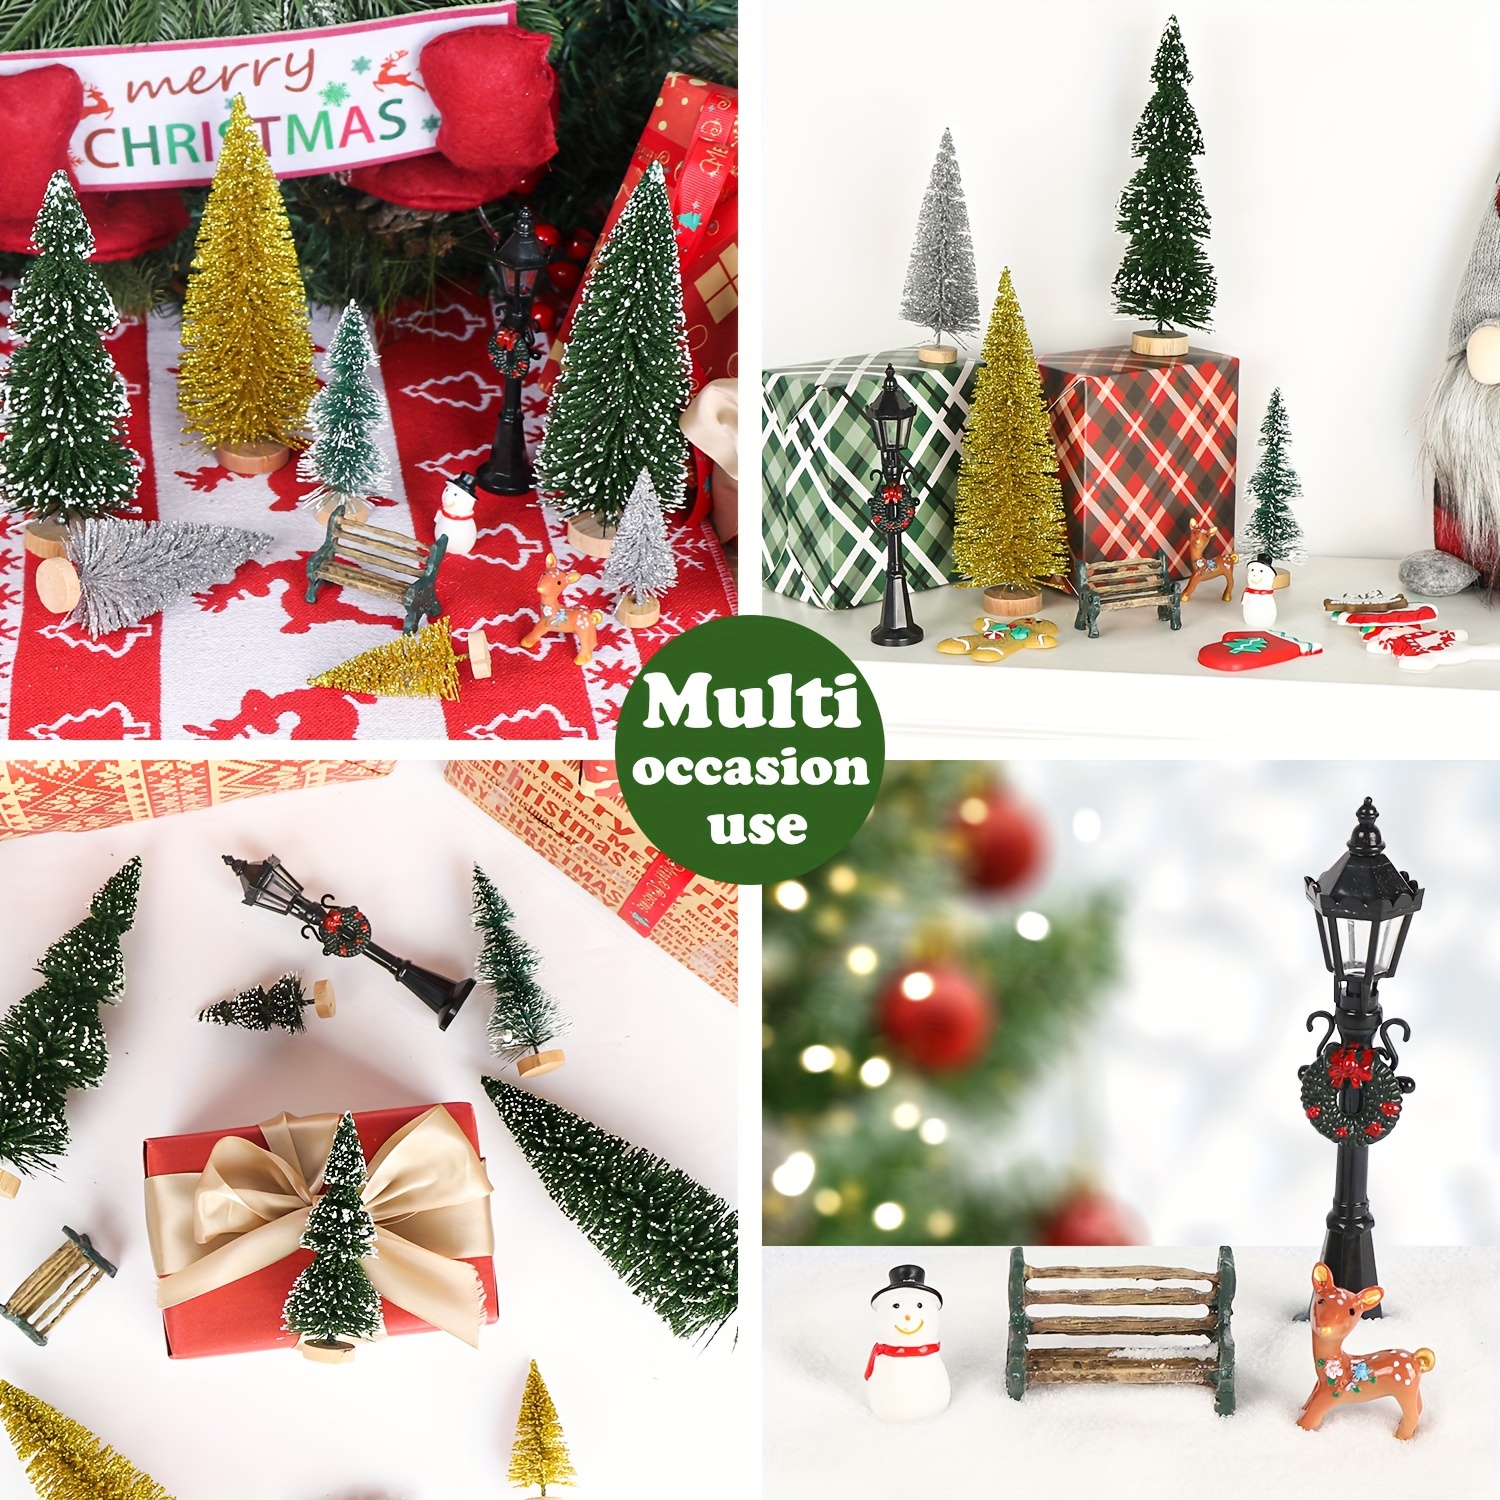  KUUQA Mini Christmas Trees Bottle Brush Trees with Snowmen  Reindeer, 31Pcs Christmas Village Sets Village Accessories Ornaments for  Christmas Decorations Indoor Village Display Platforms Winter Decor : Home  & Kitchen